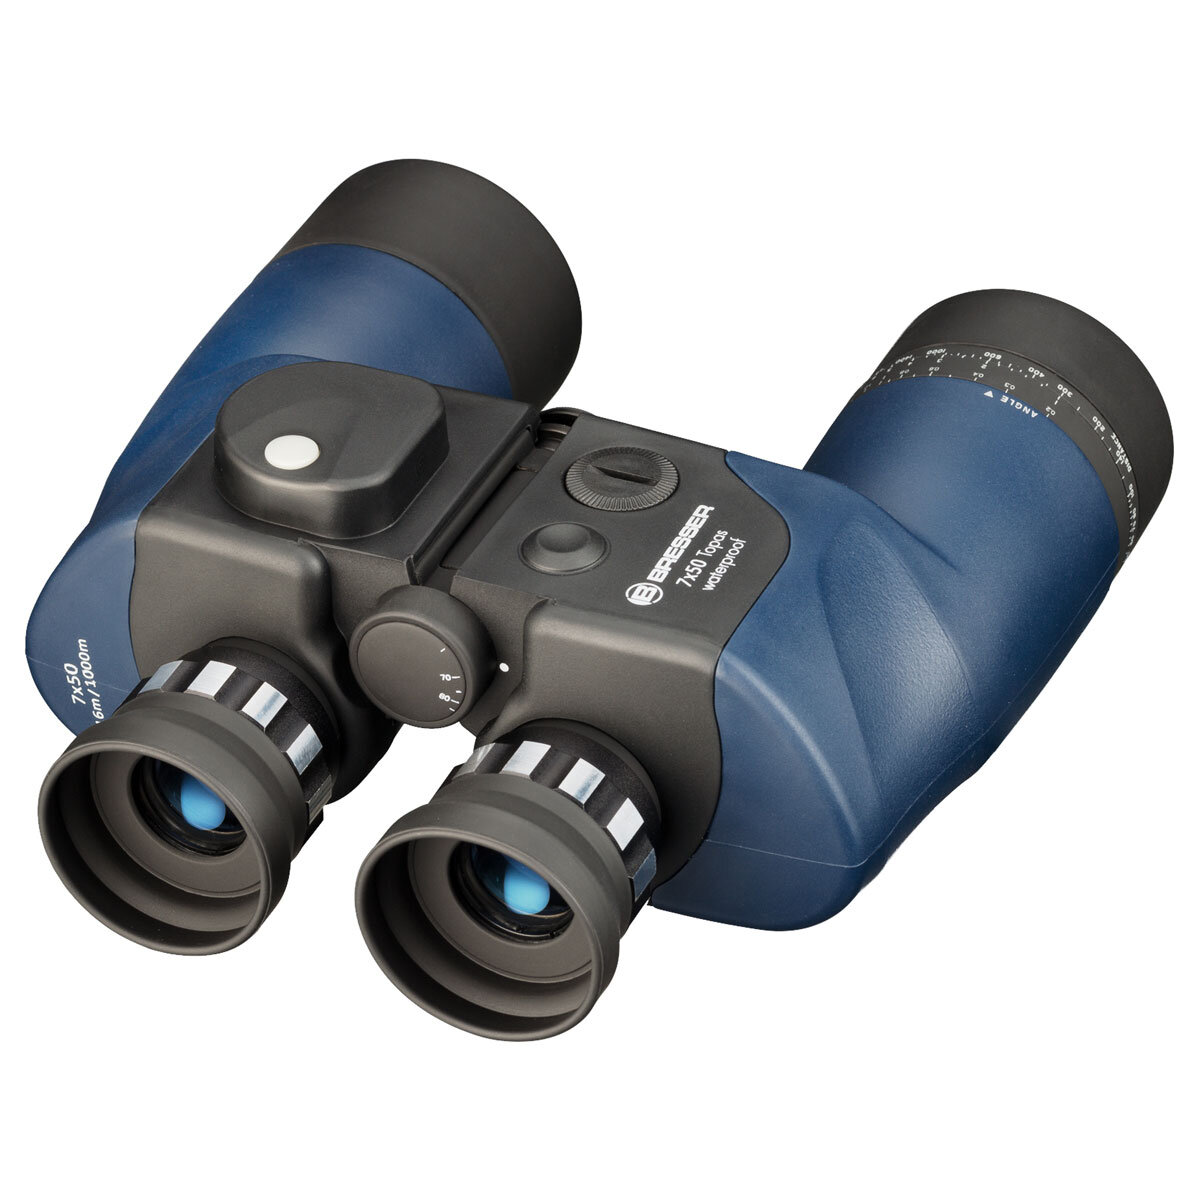 Image for Bresser Topas 7x50 Binoculars with Built-in Compass